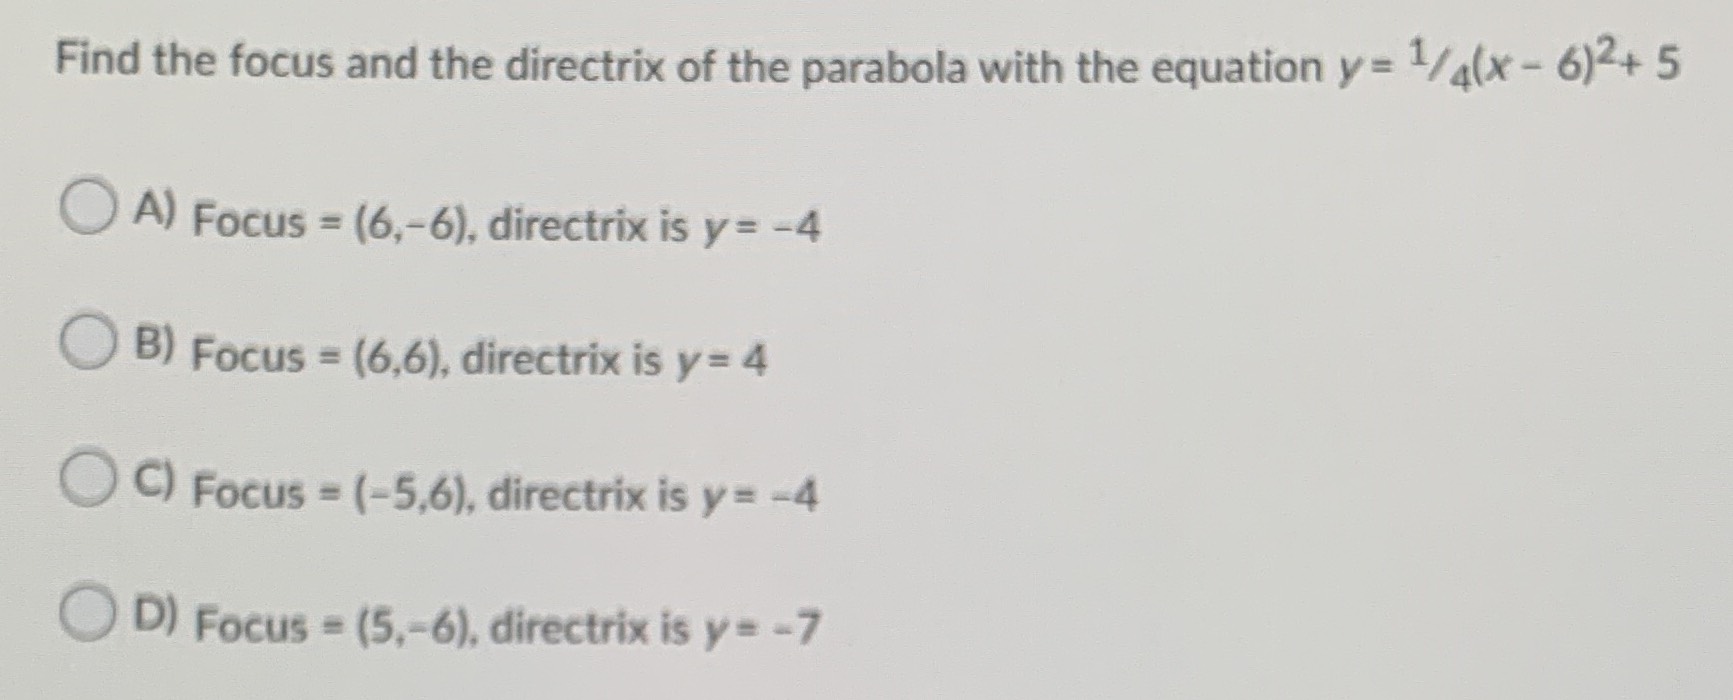 Find the focus and the directrix of the parabola w...